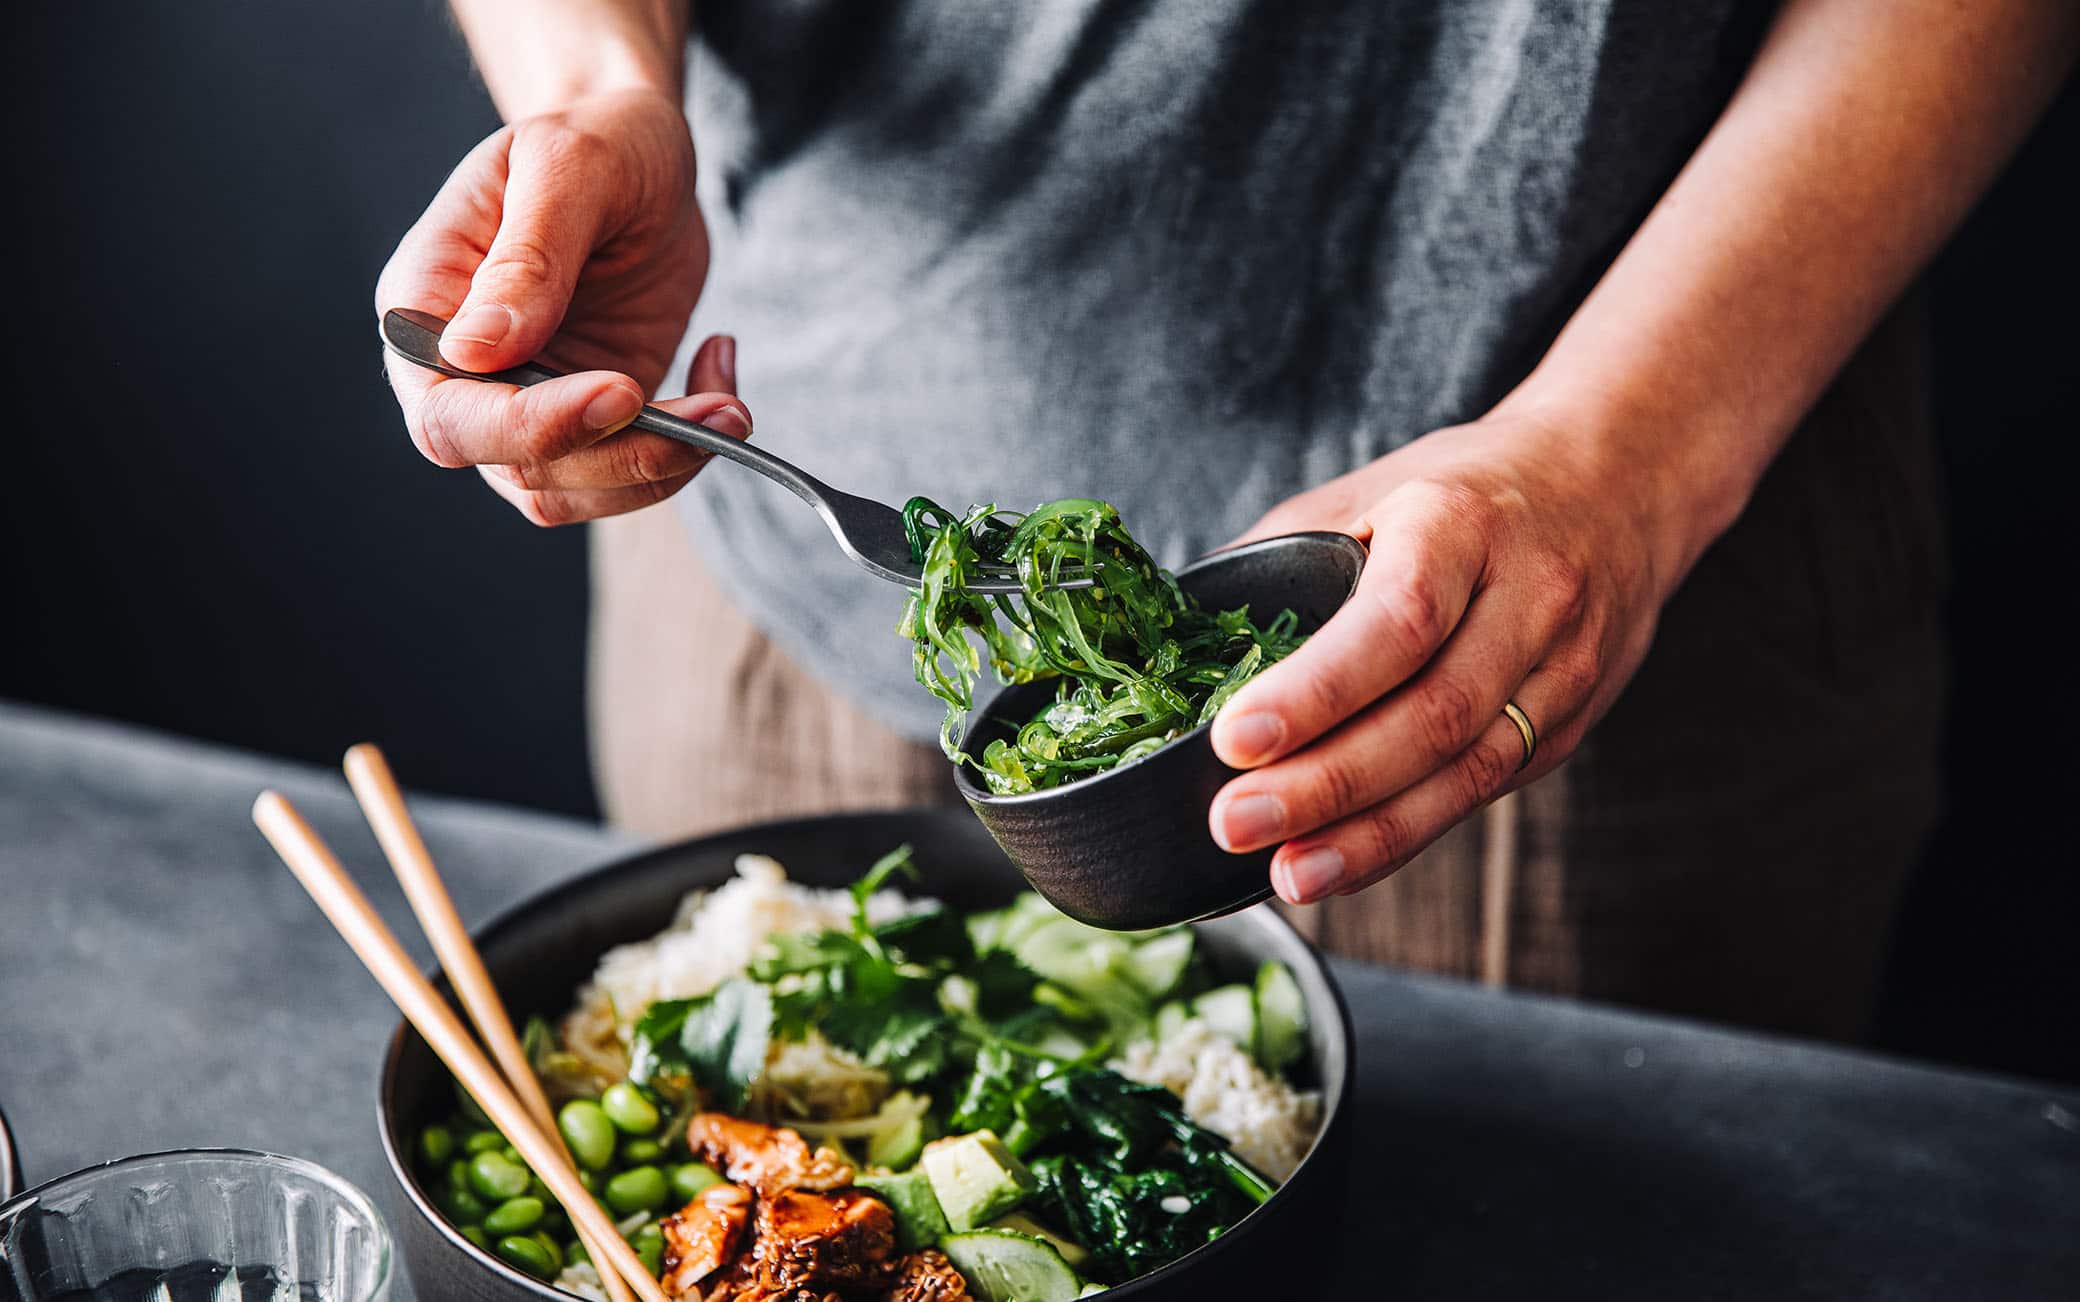 Close-up of woman eating omega 3 rich salad. Female having healthy salad consist of chopped salmon, spinach, brussels sprouts, avocado, soybeans, wakame and chia seeds in a bowl.